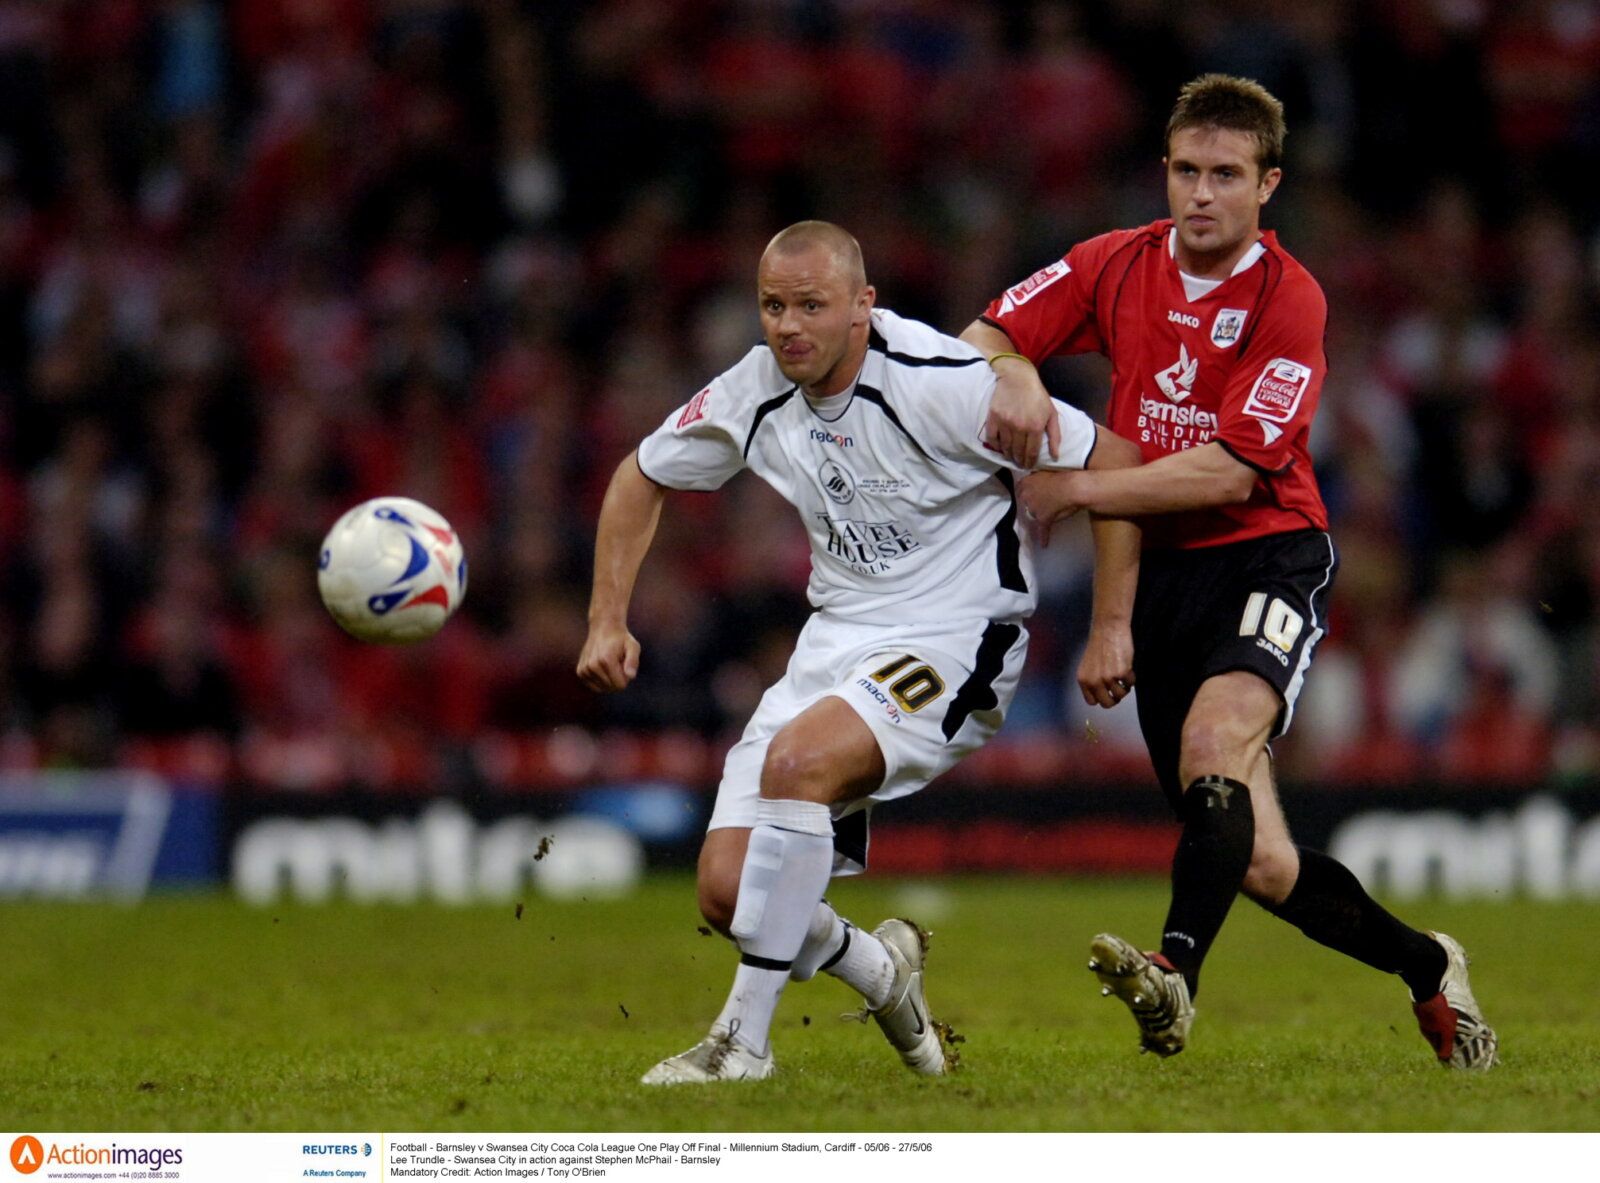 Football - Barnsley v Swansea City Coca-Cola  League One Play Off Final - Millennium Stadium, Cardiff - 05/06 - 27/5/06 
Lee Trundle - Swansea City in action against Stephen McPhail - Barnsley 
Mandatory Credit: Action Images / Tony O'Brien